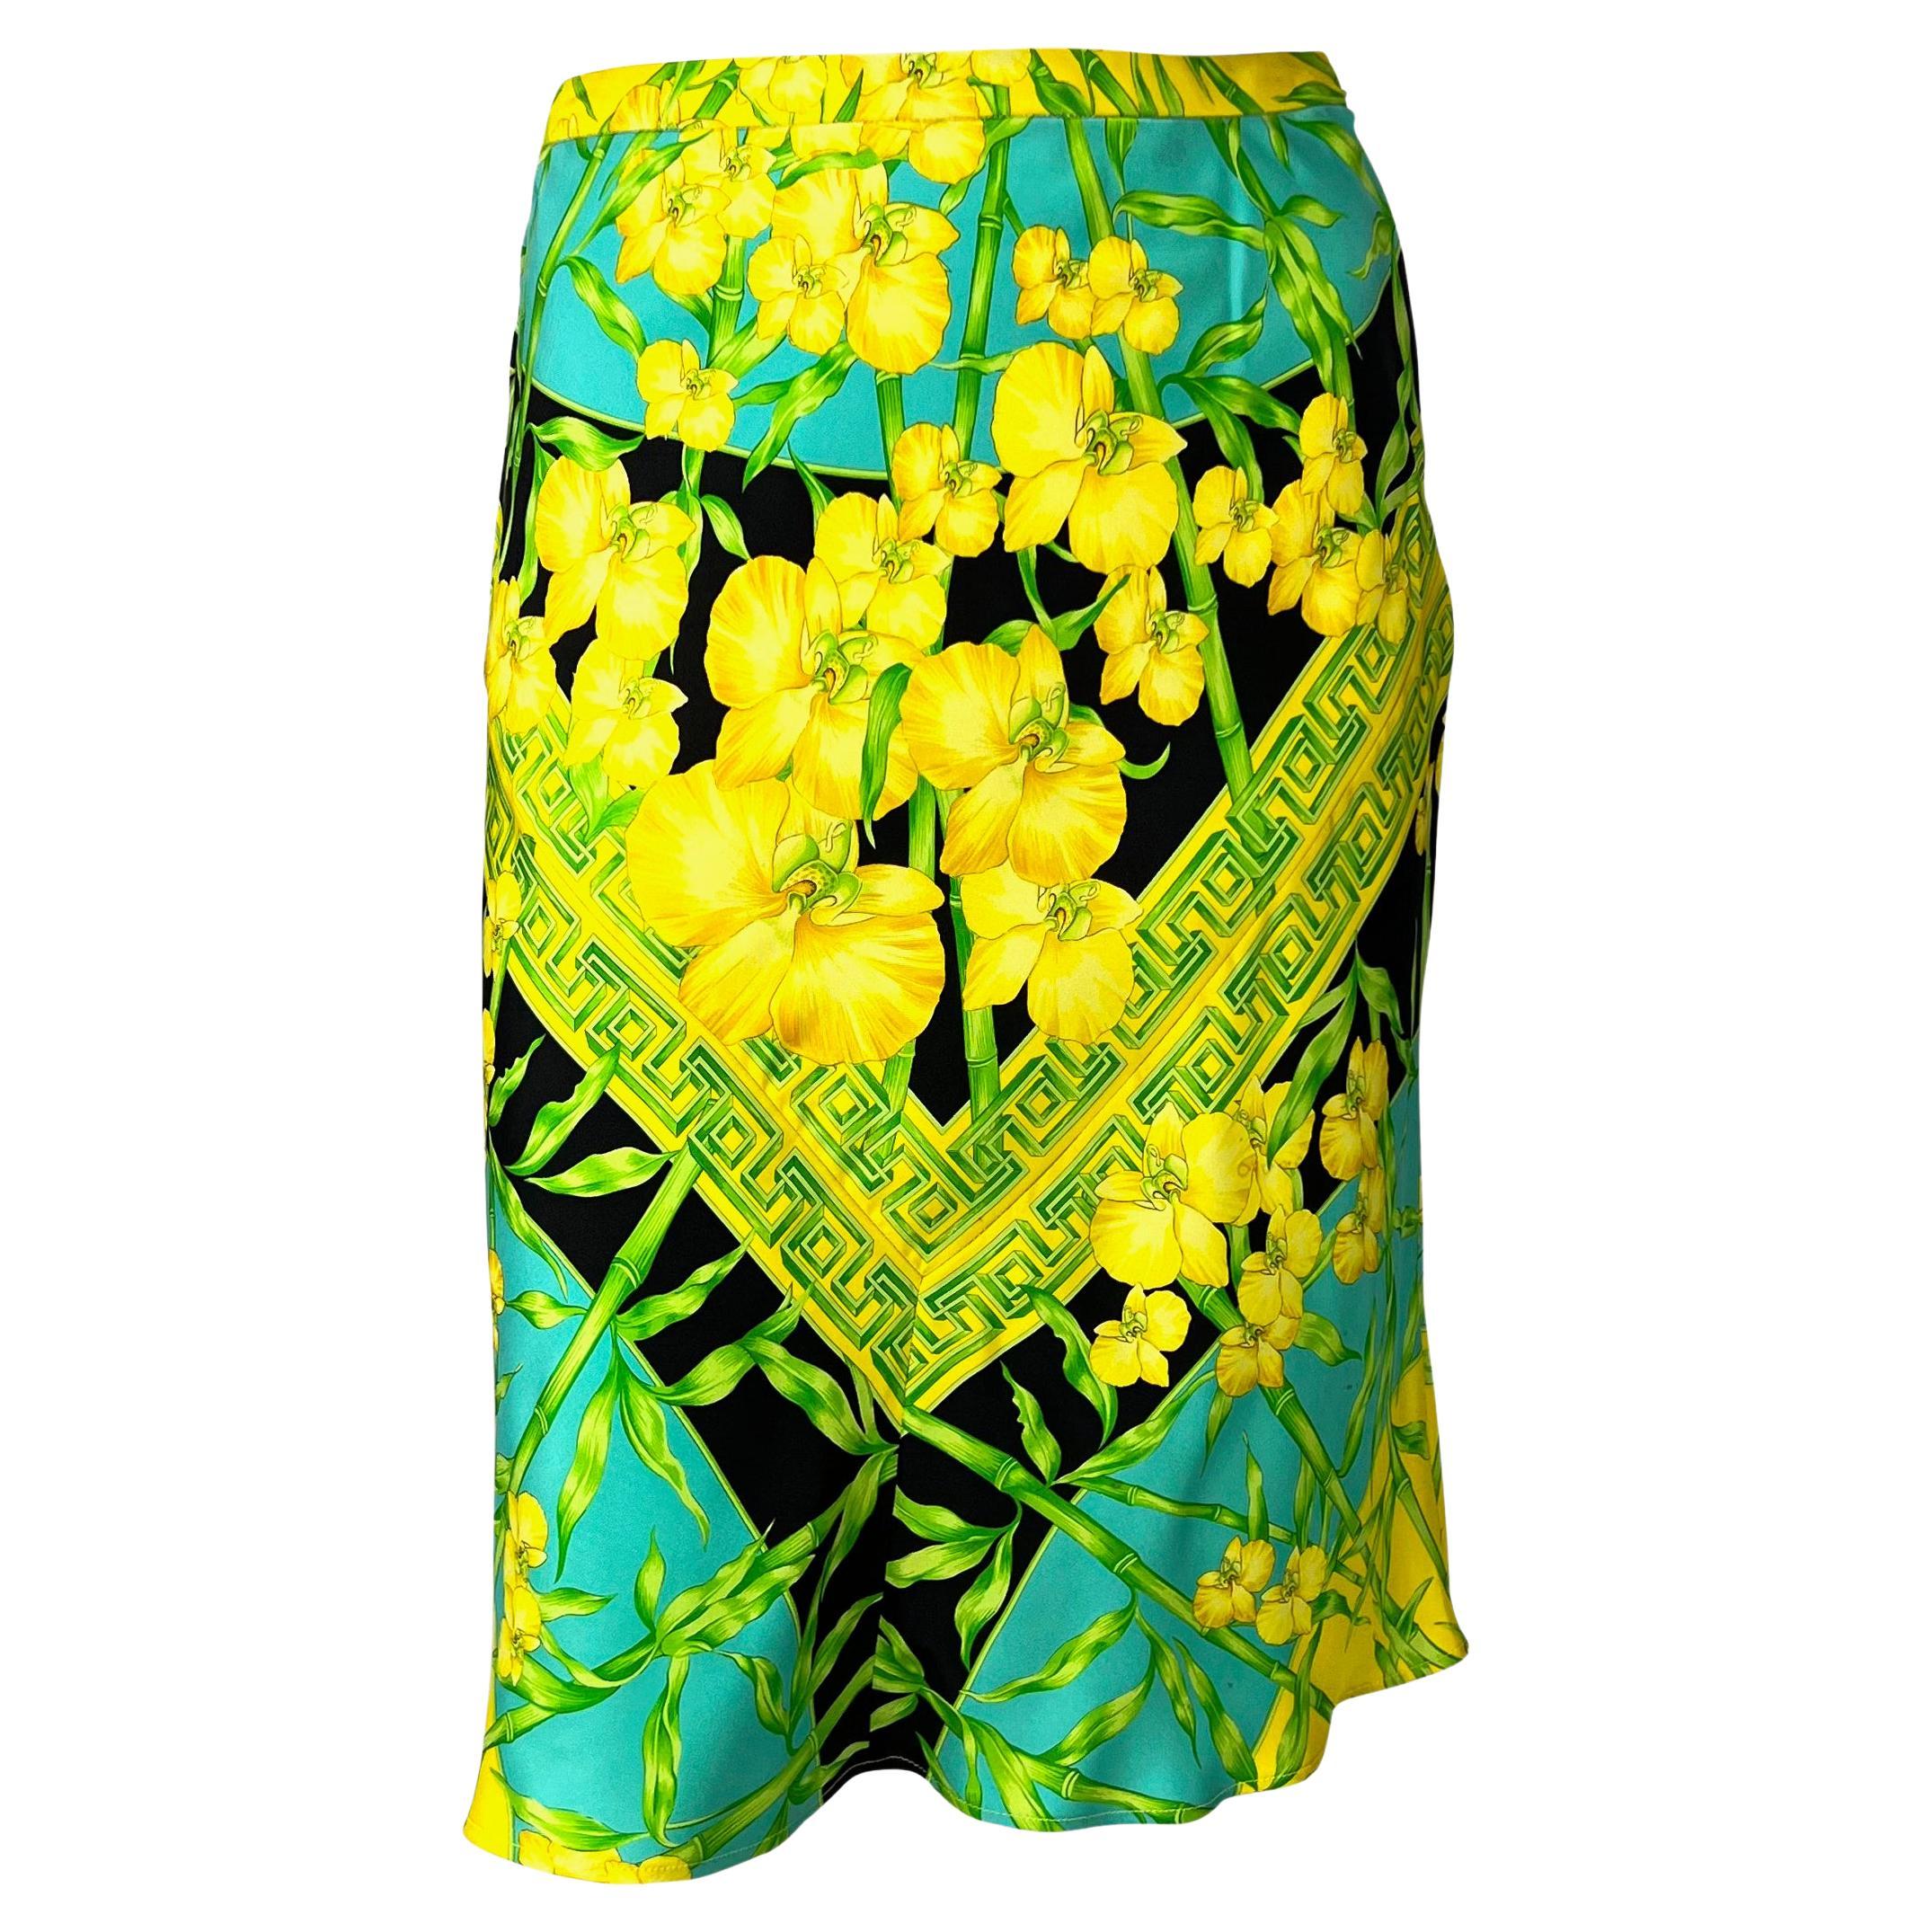 S/S 2000 Gianni Versace by Donatella Orchid Greek Key Jungle Print Silk Skirt For Sale